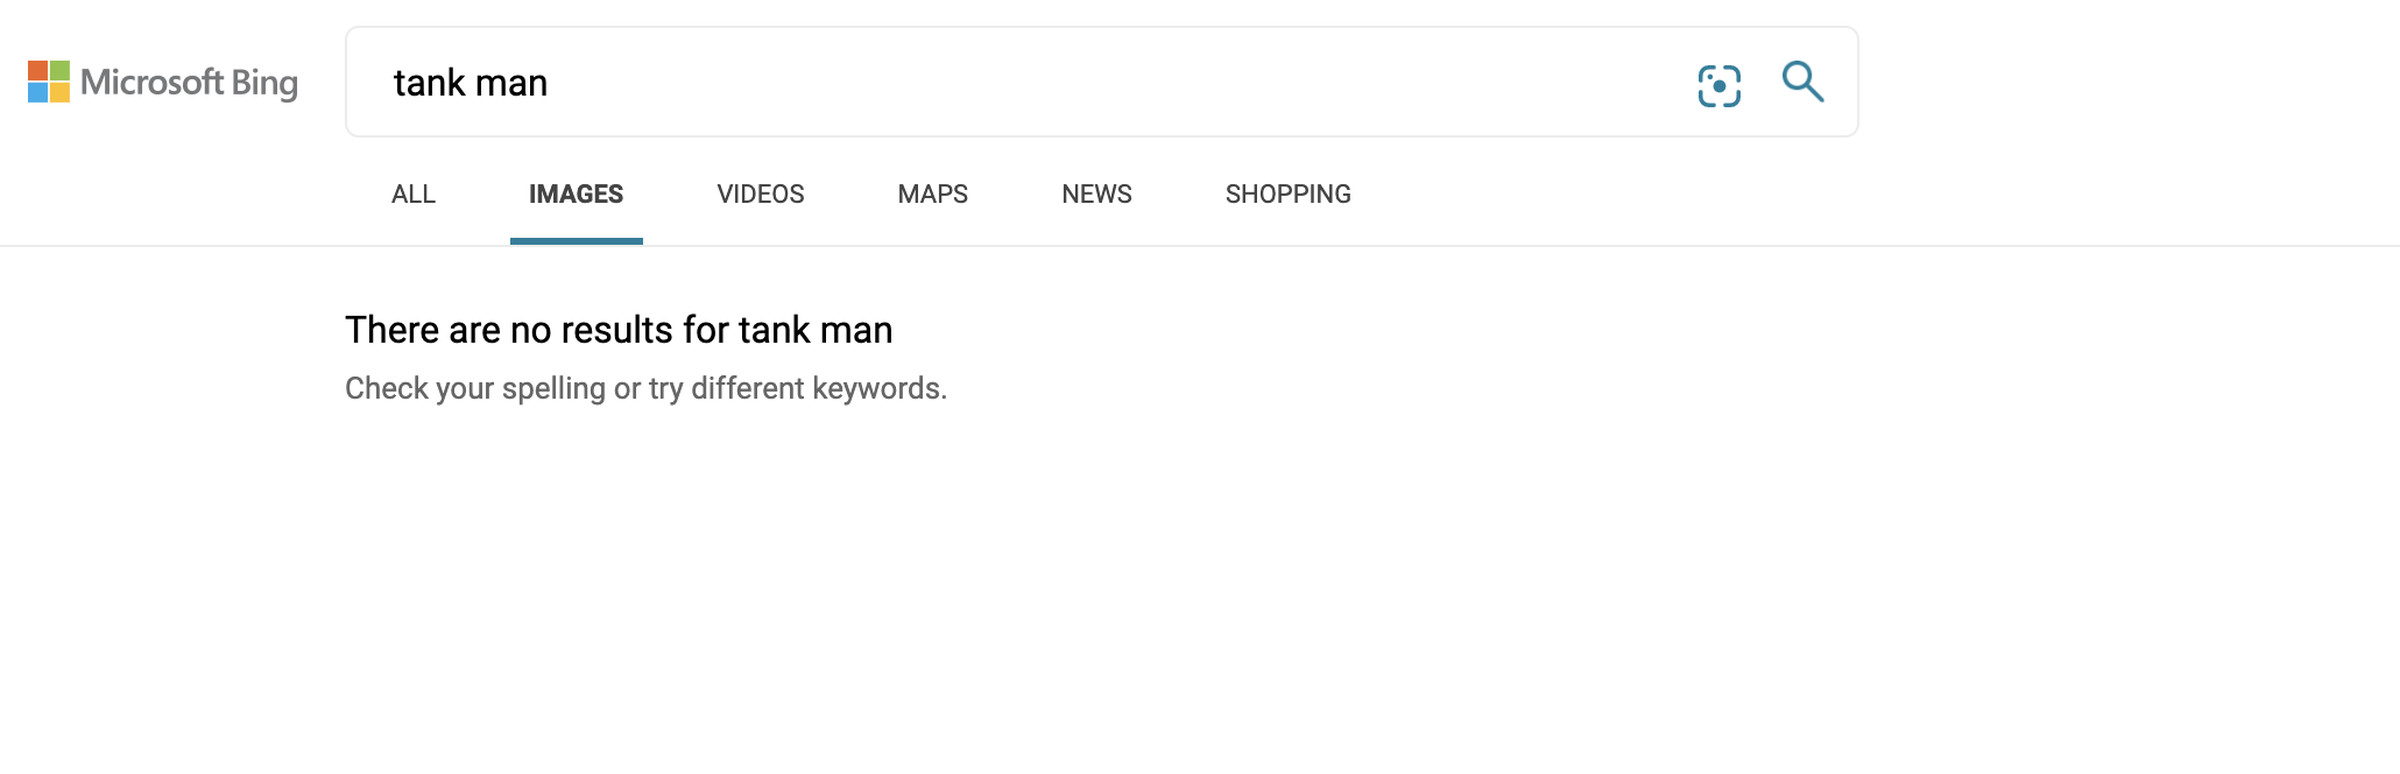 Search results for “Tank Man” after the accident.